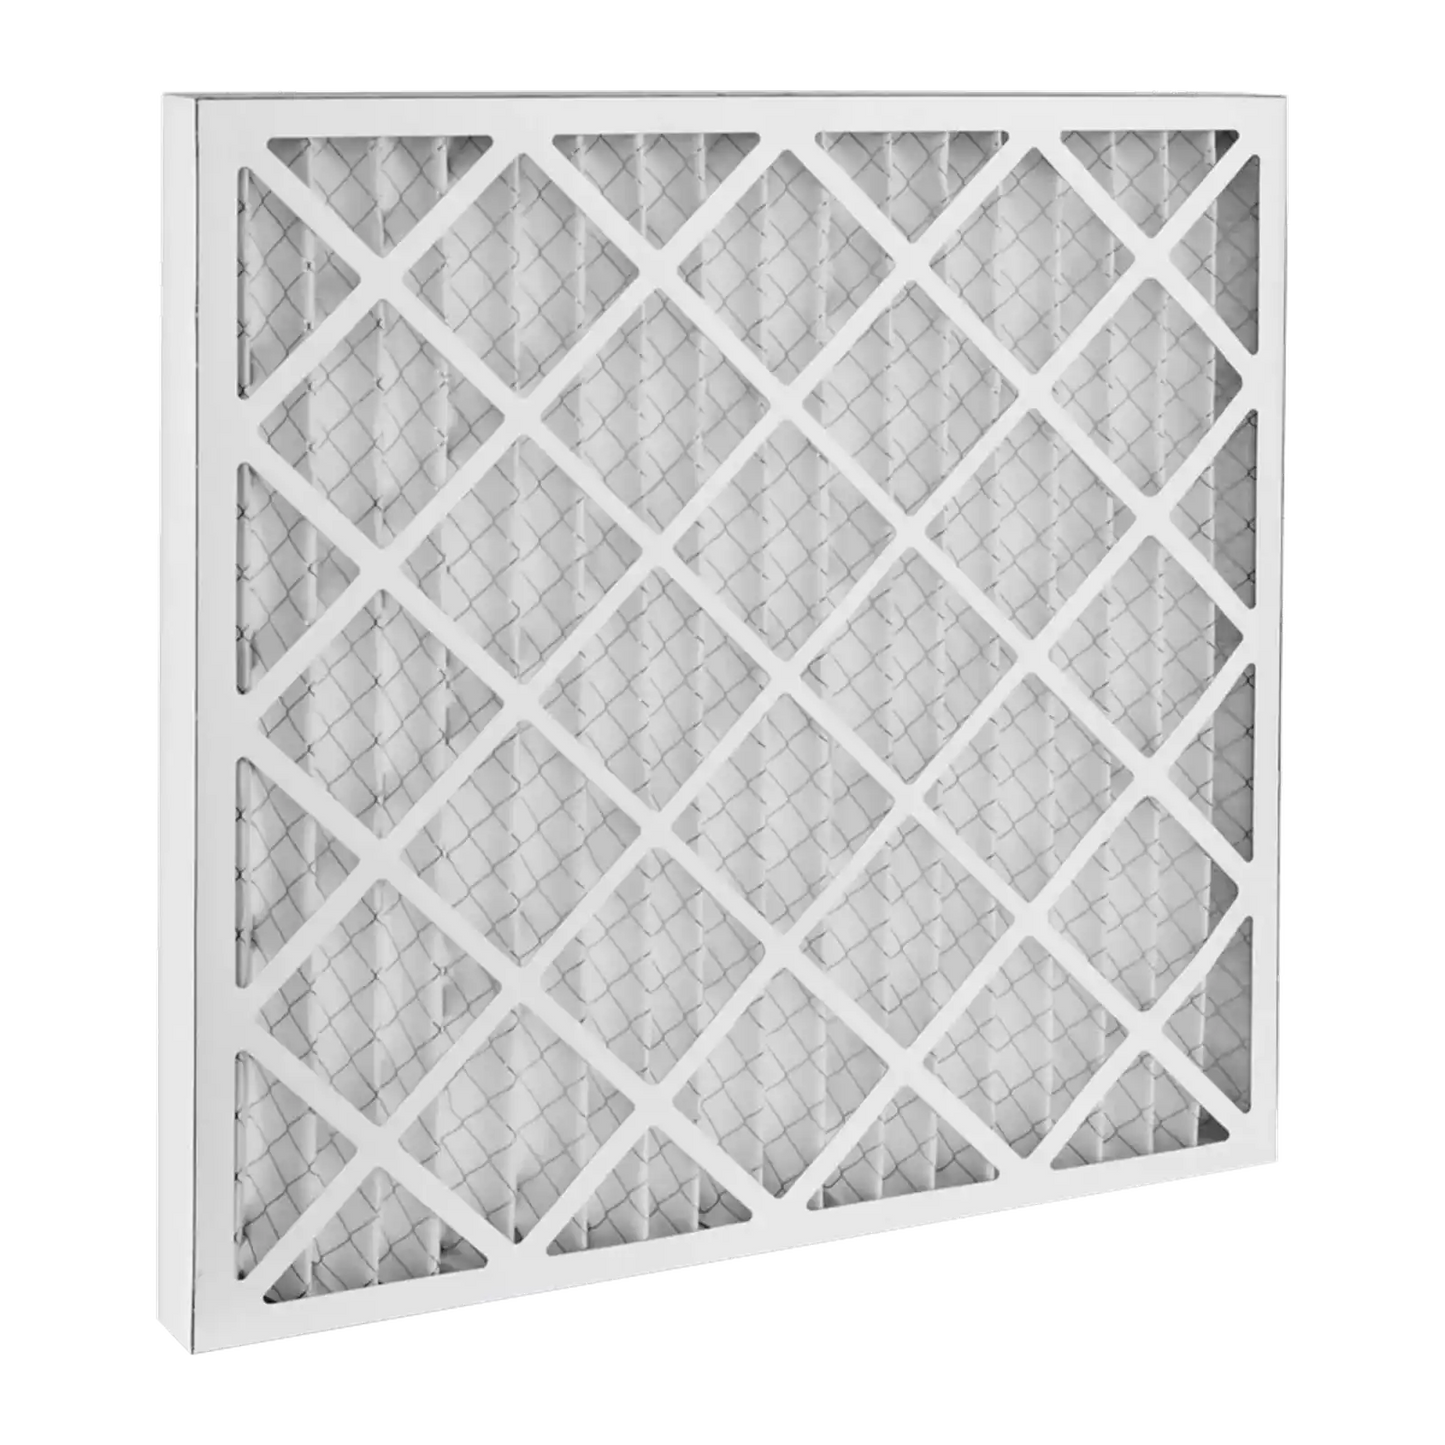 Dafco 15x20x1 Furnace AC Filter - Case of 12